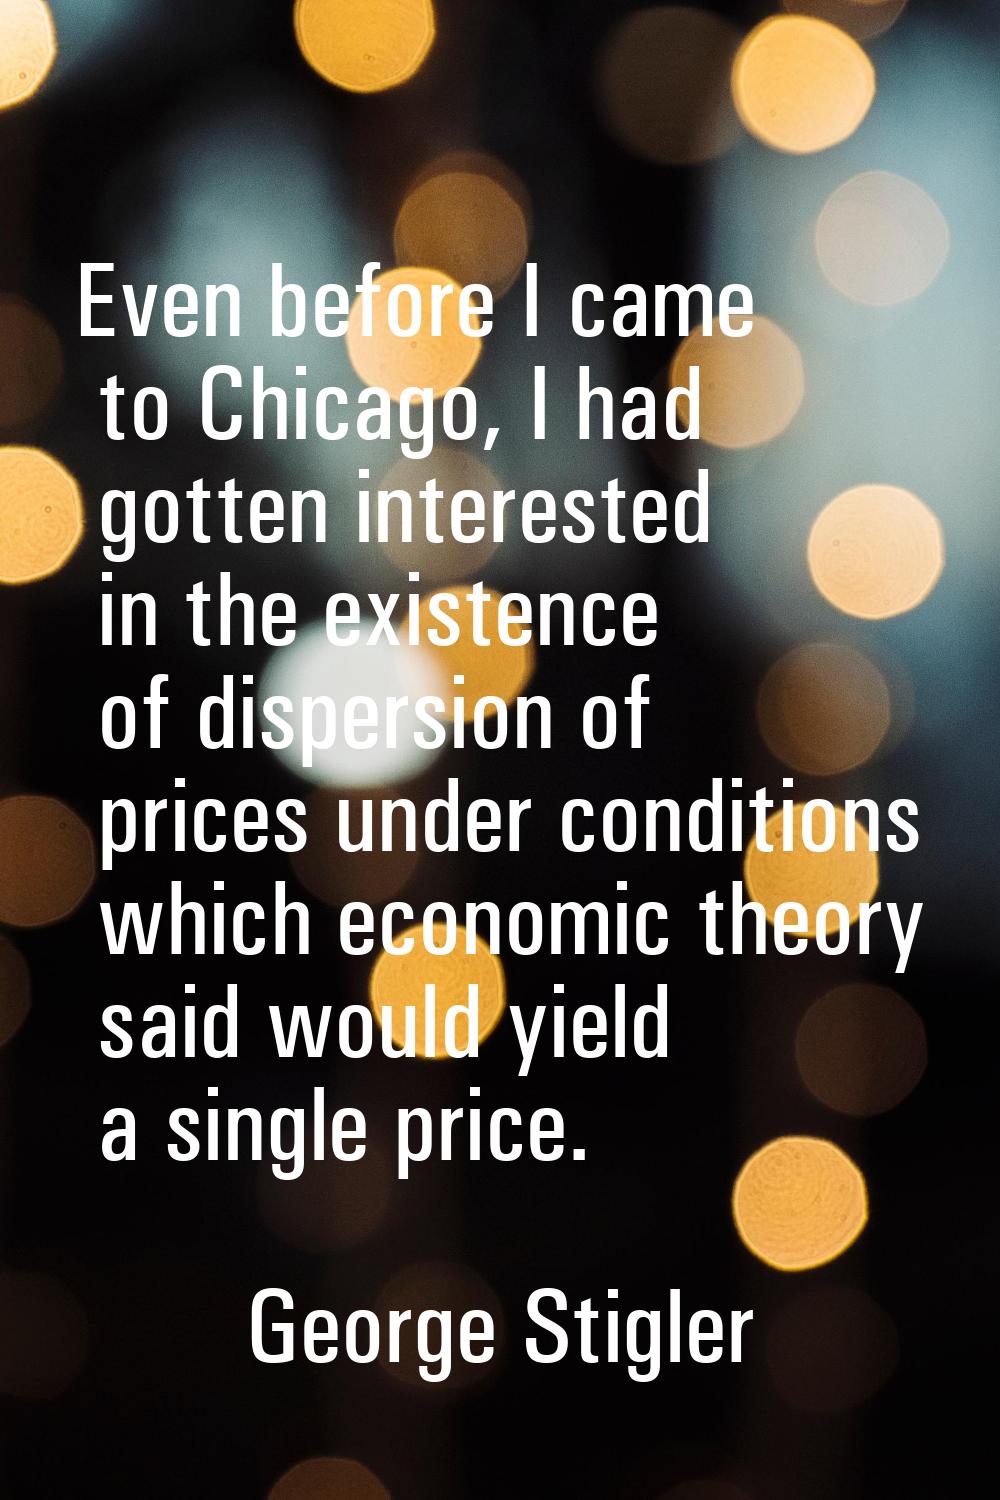 Even before I came to Chicago, I had gotten interested in the existence of dispersion of prices und